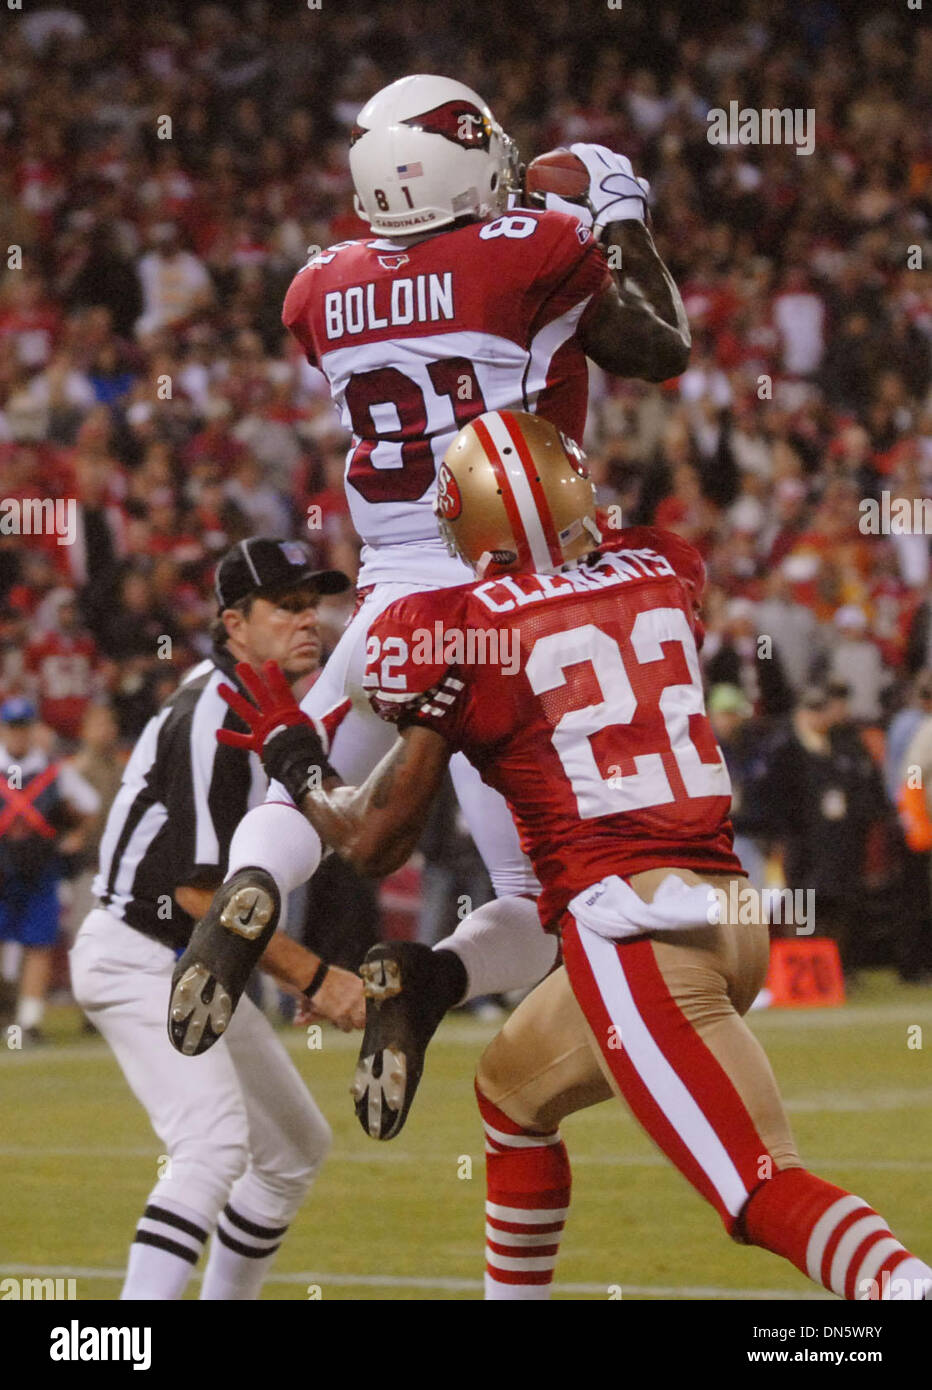 Arizona Cardinals wide receiver Anquan Boldin goes up for the ball